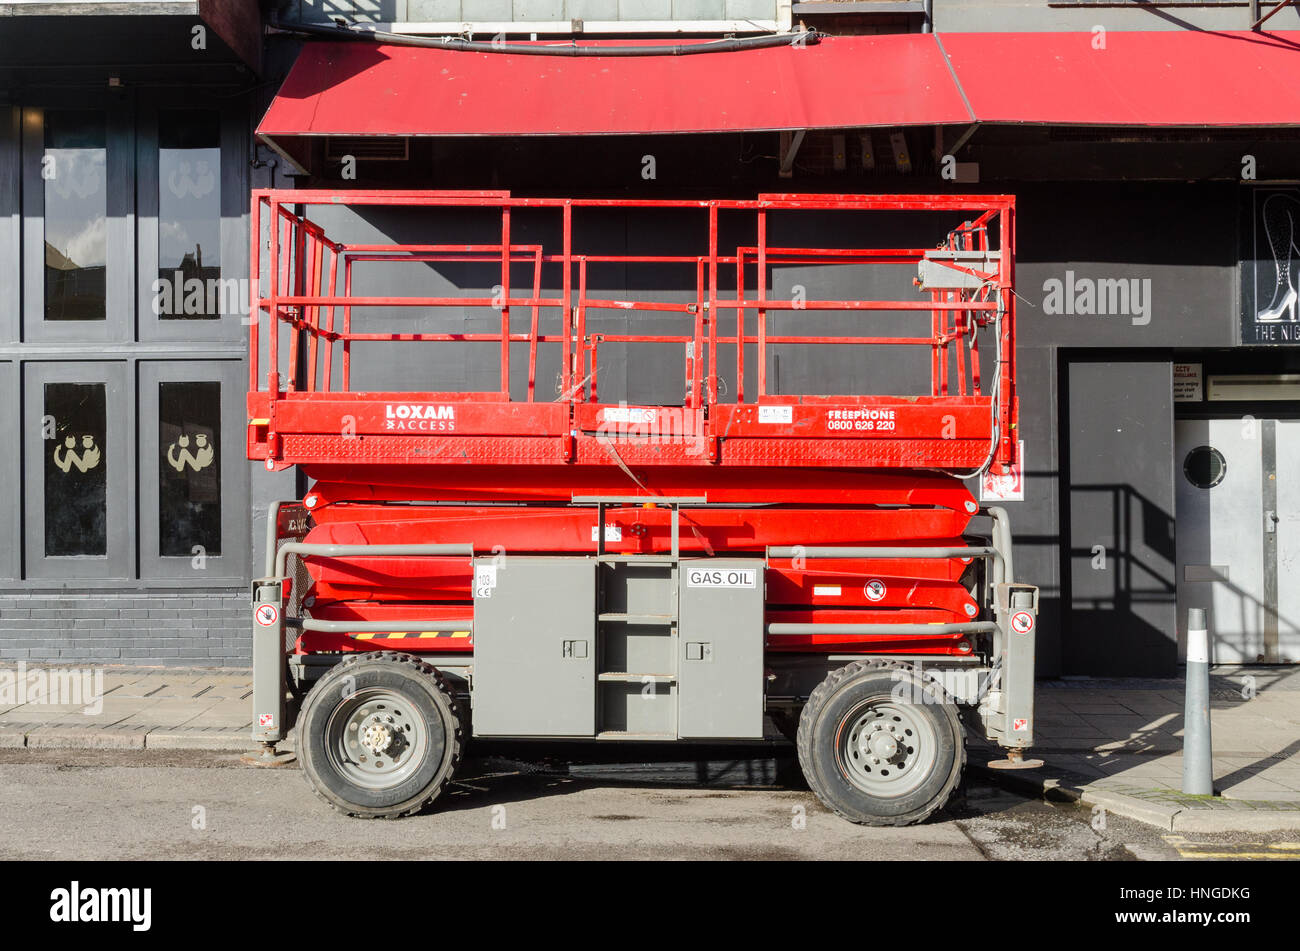 Red hydraulic platform parked in a road Stock Photo